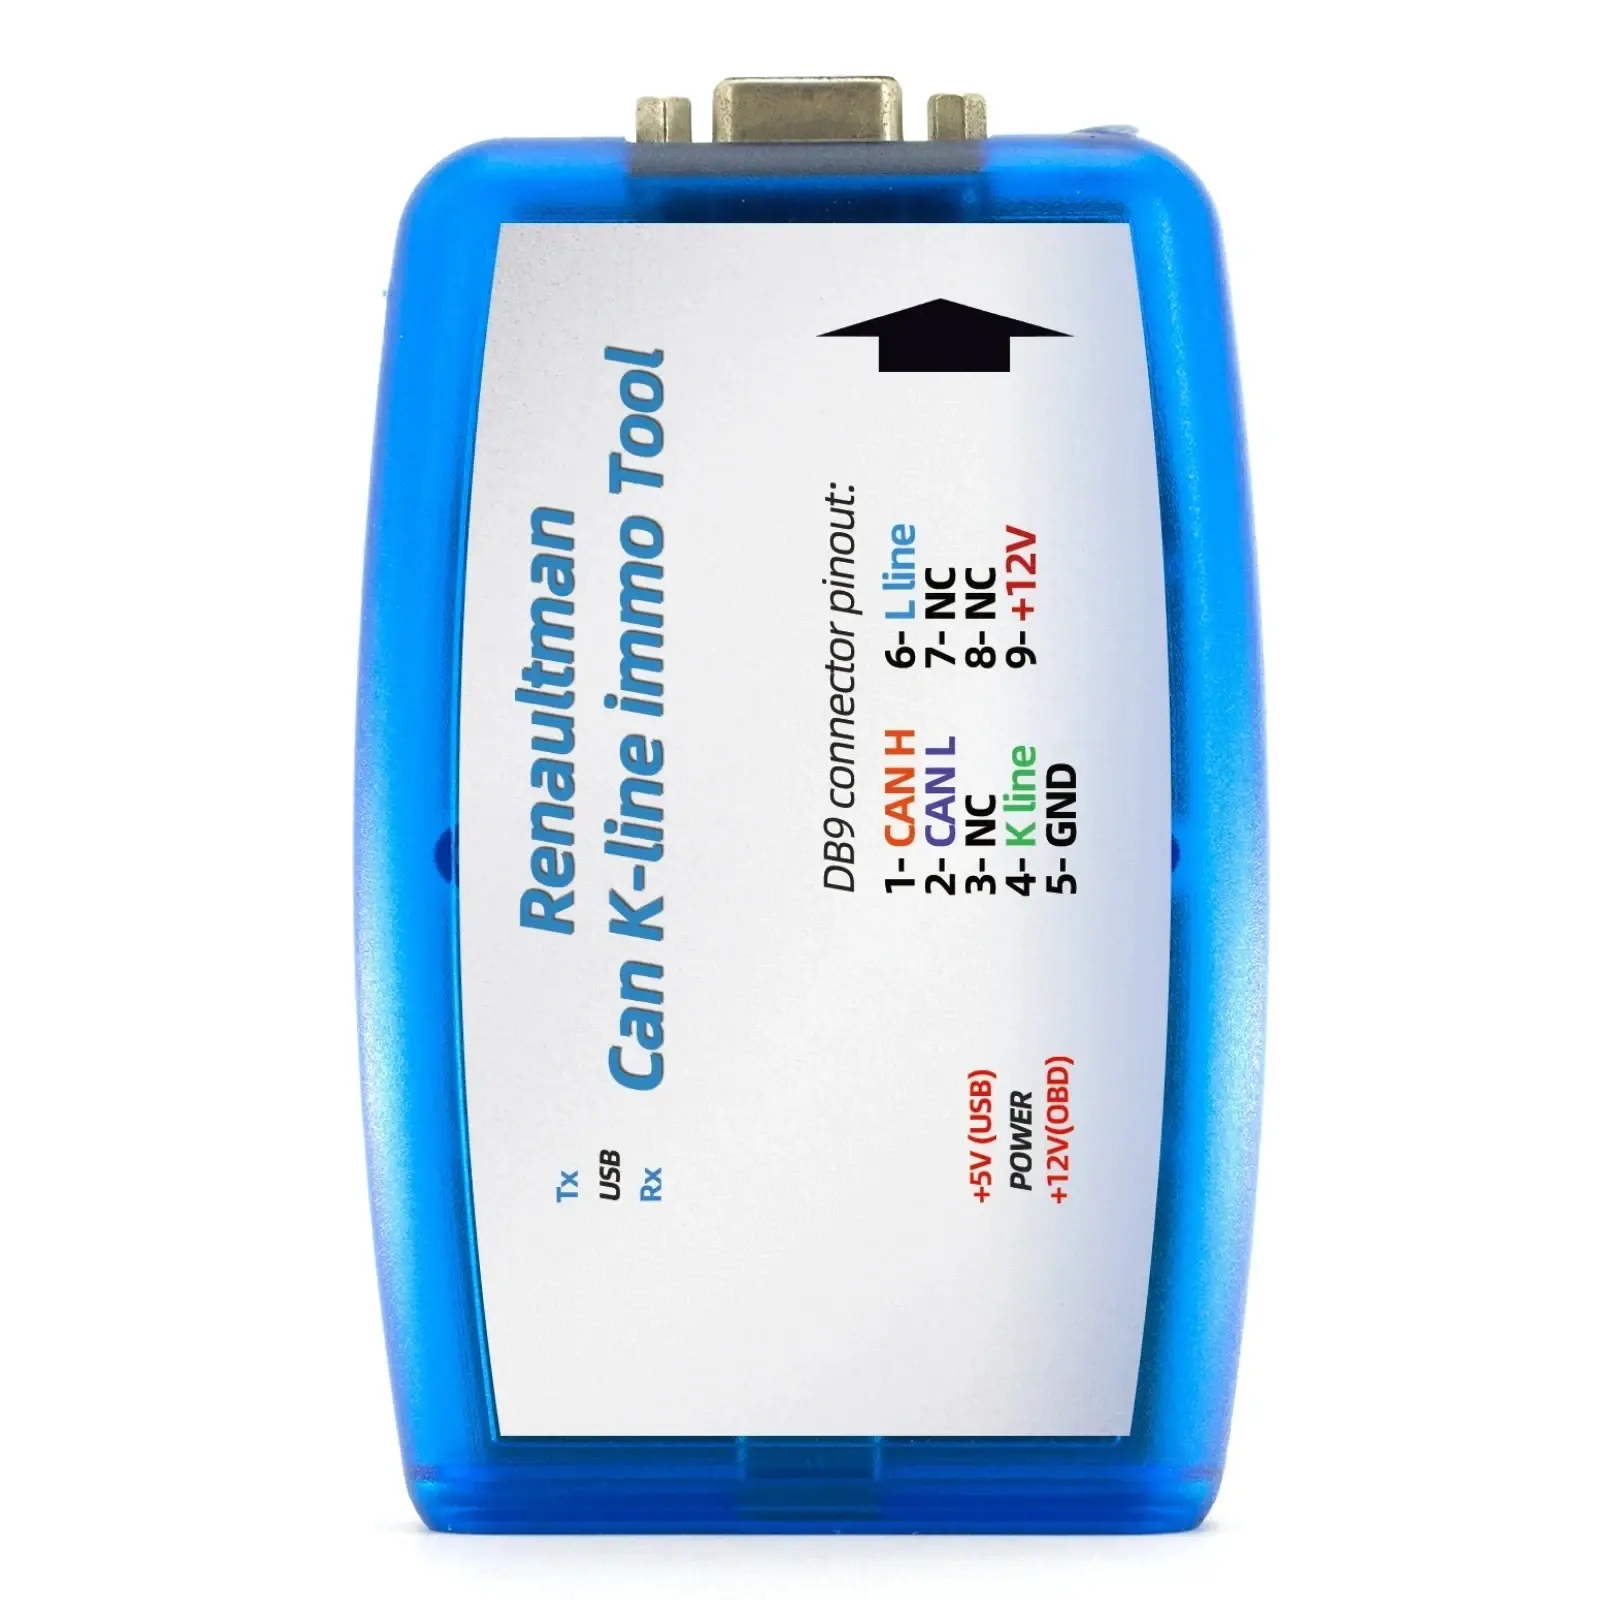 For Renaultman Can K-line Immo V4.04 Fit for Renault CAN/K-line ECU Tool OBD2 Programmer Read / Write EEPROM Diagnostic Tool